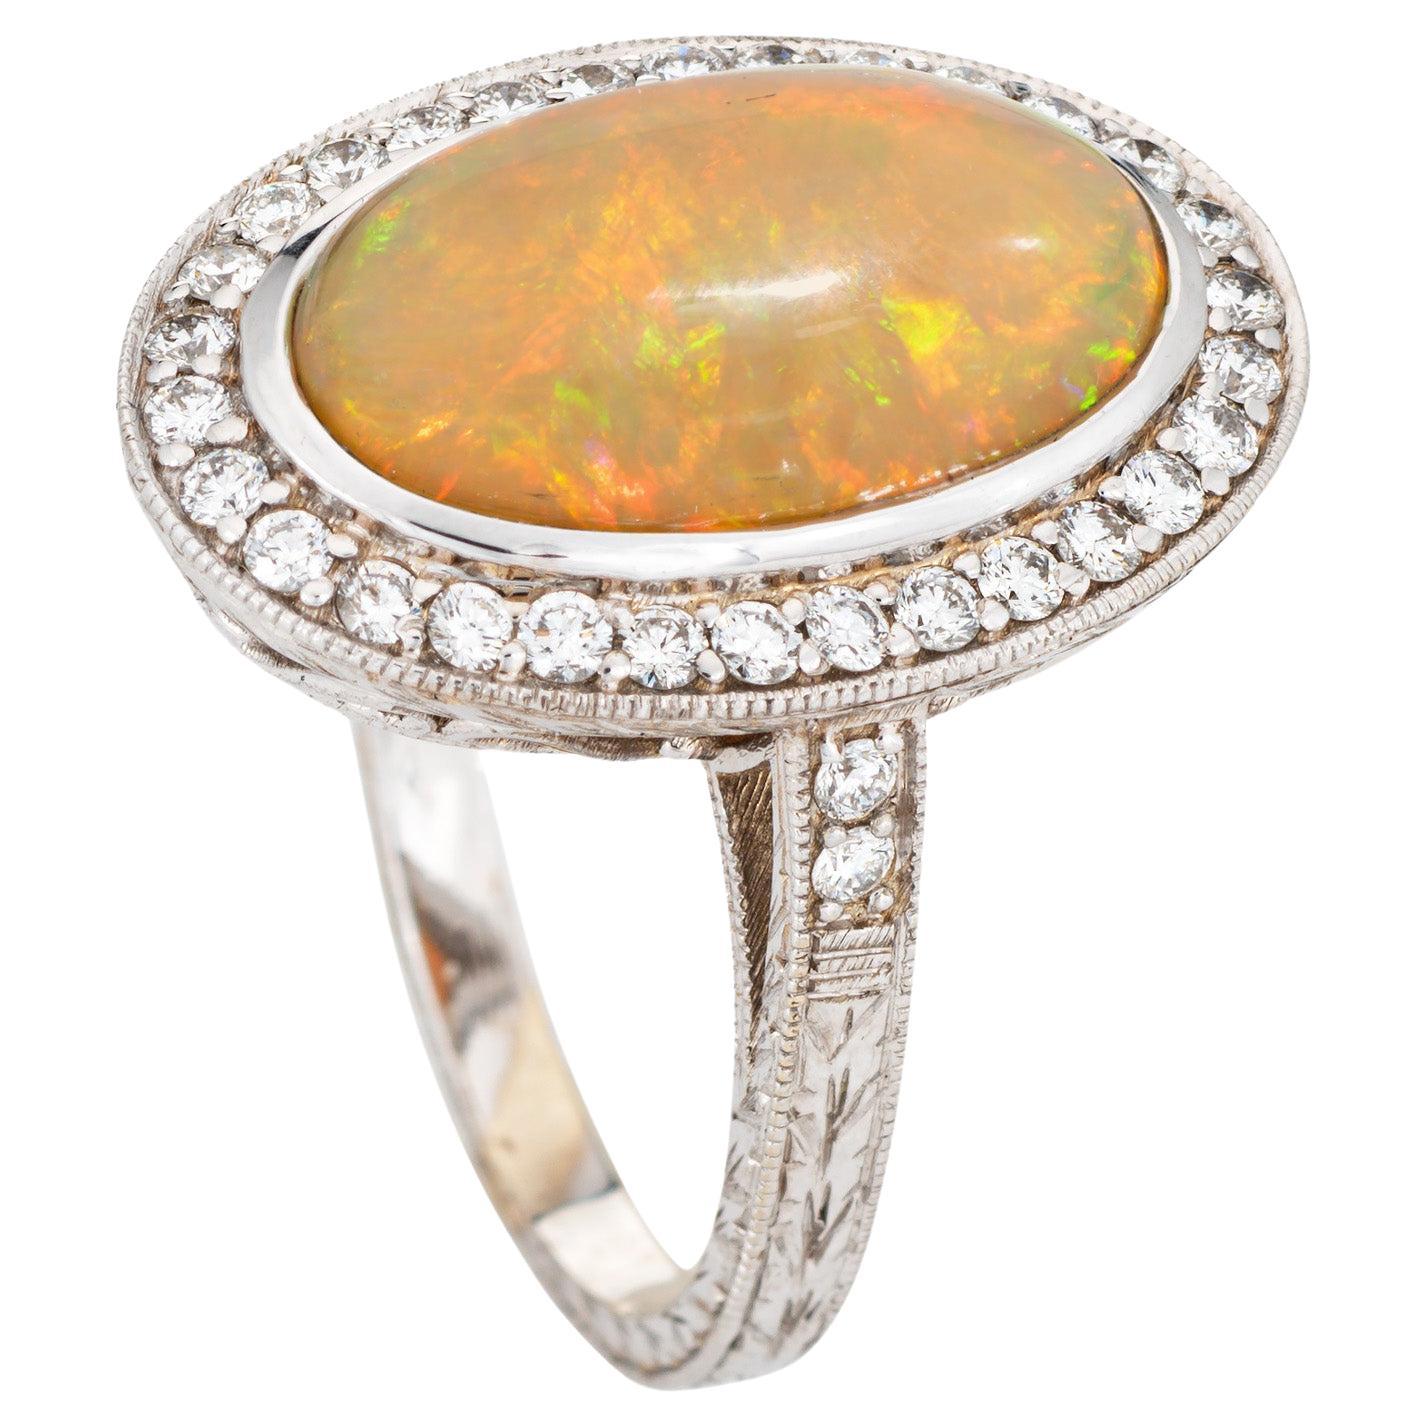 Fire Opal Diamond Ring Large Oval Estate 18k White Gold Sz 9 Cocktail Fine Jewel For Sale